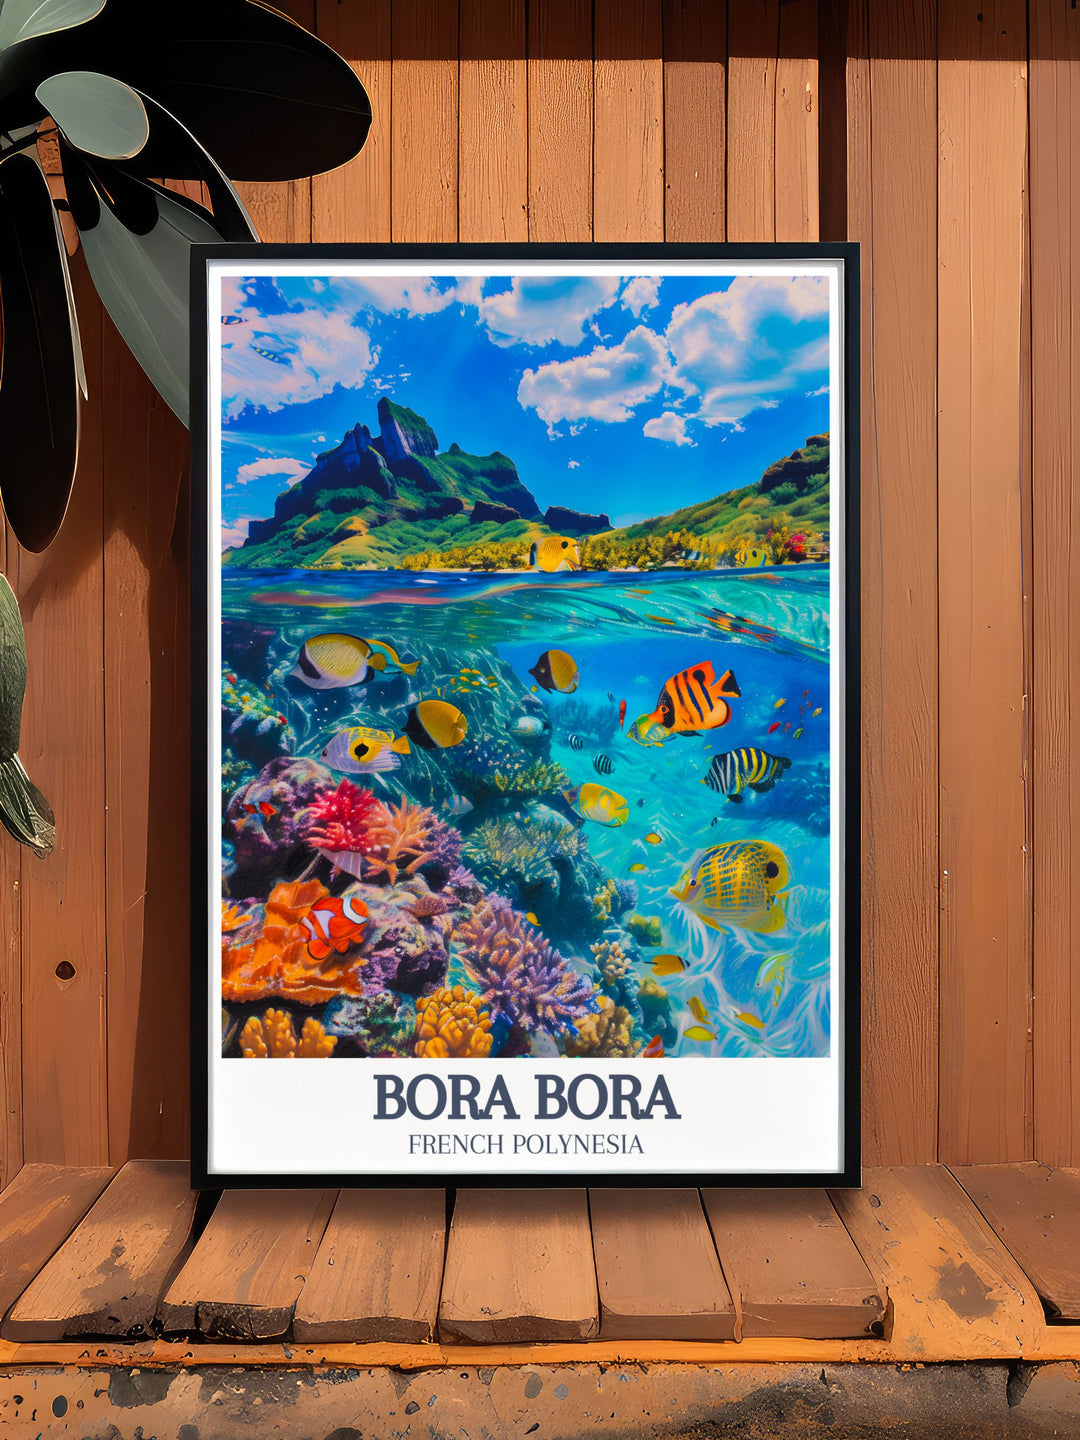 Stunning Bora Bora Lagoon Coral Gardens artwork featuring the turquoise waters and lush coral reefs of Bora Bora island this travel print is ideal for those who appreciate the natural beauty of French Polynesia perfect for enhancing any living space with its serene ambiance.